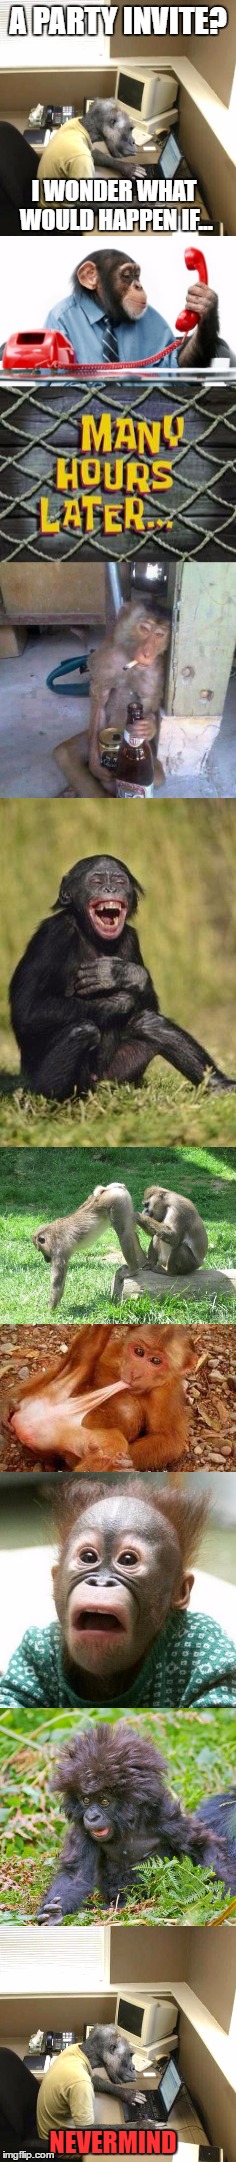 He senses monkey business. | A PARTY INVITE? I WONDER WHAT WOULD HAPPEN IF... NEVERMIND | image tagged in monkey,funny,meme,animals,oh look a tag,oh look another redundant useless tag | made w/ Imgflip meme maker